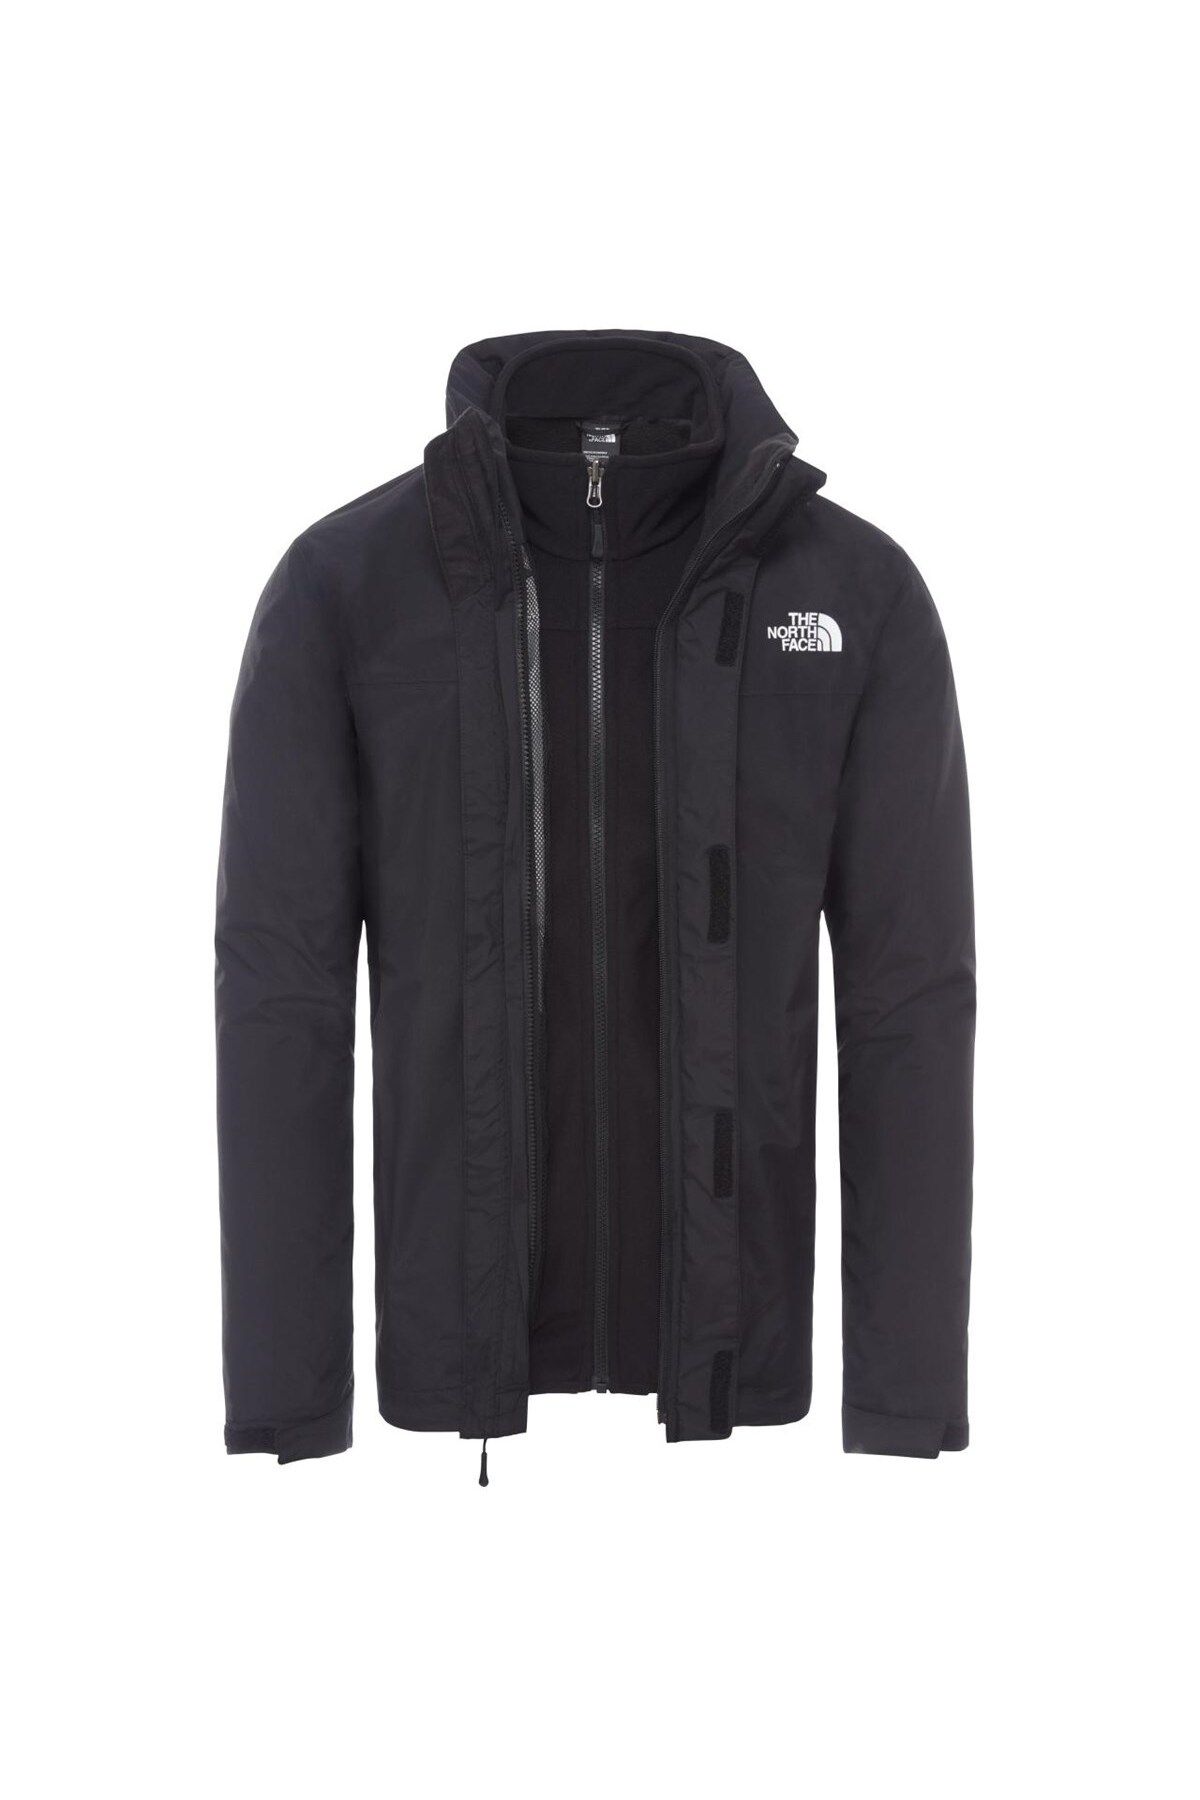 The North Face New Original Triclimate Erkek Mont